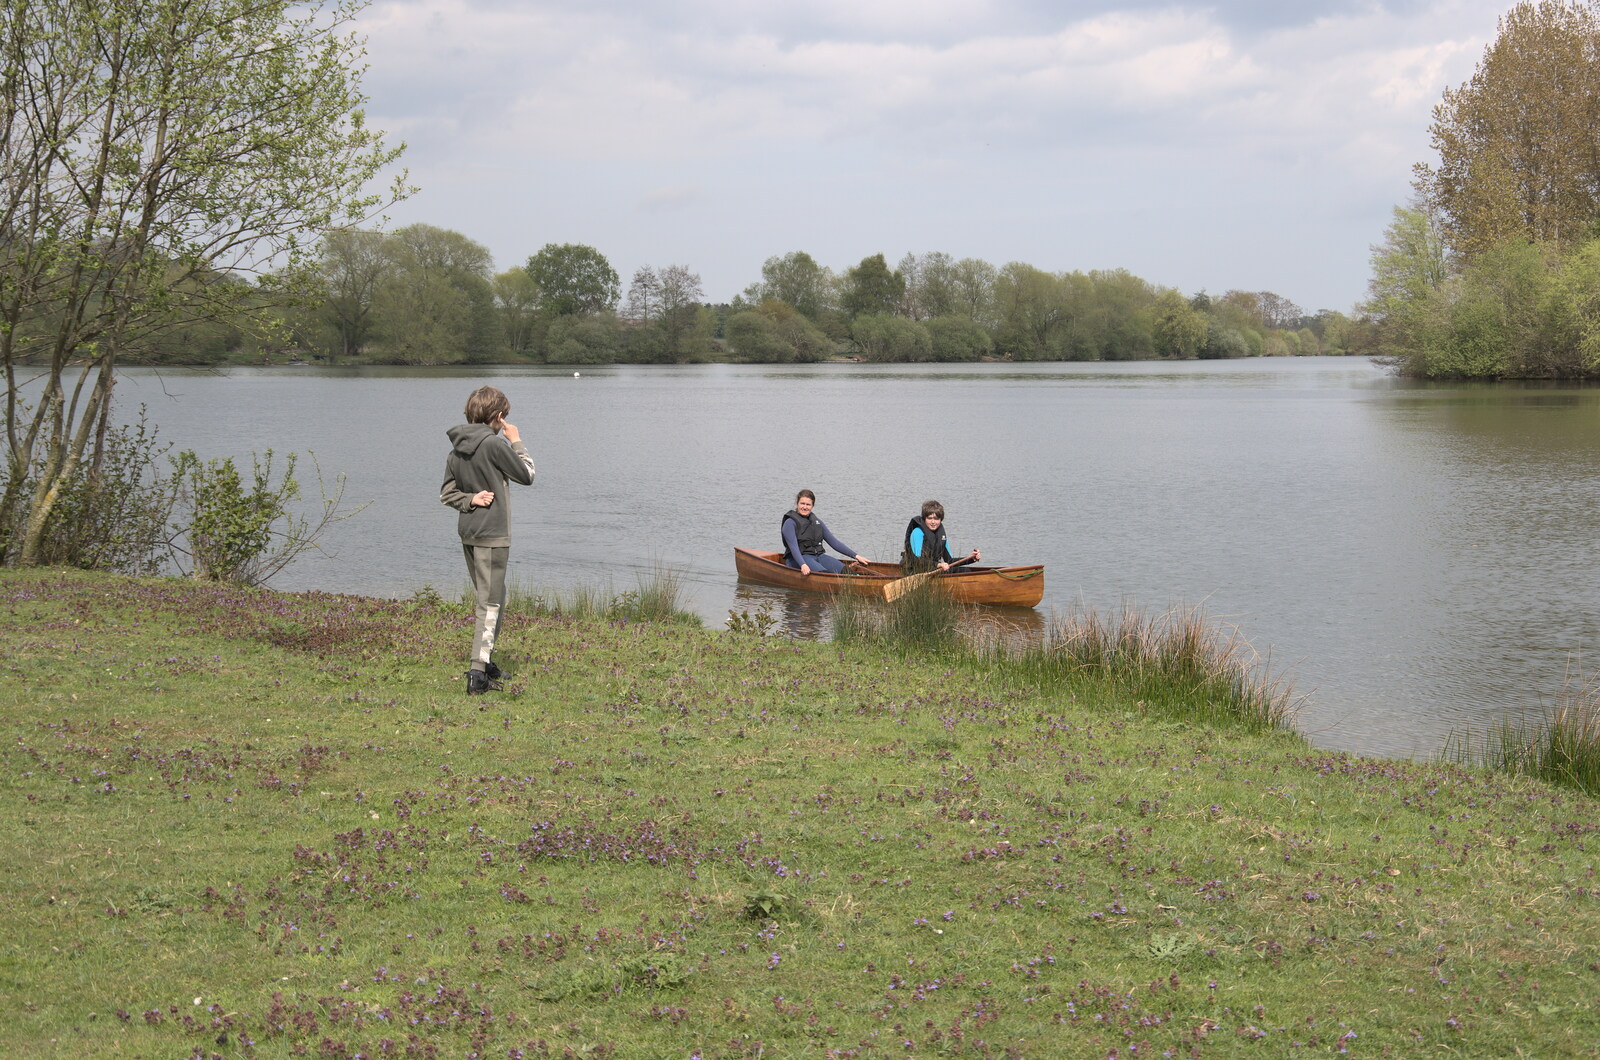 The Canoe's First Outing, Weybread Lake, Harleston - 1st May 2022: Isobel and Fred come back from a trip